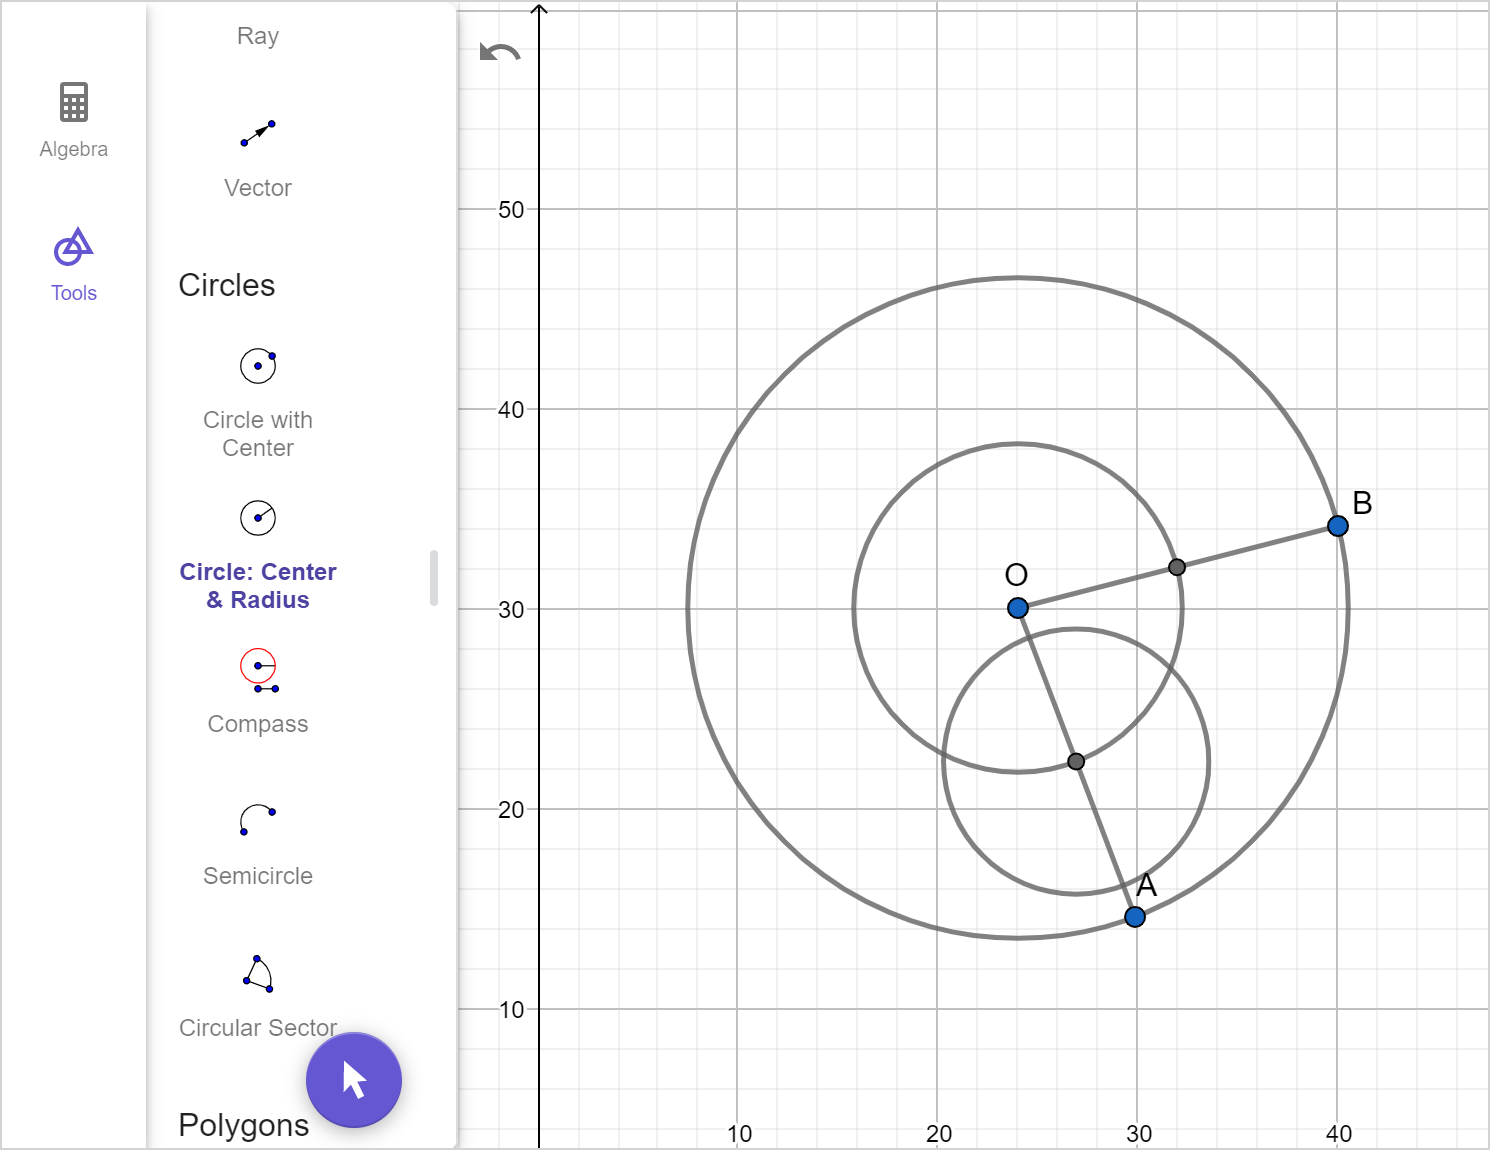 A screenshot of the GeoGebra geometry tool showing the previous image with a small circle centered at one of the points of intersection. Speak to your teacher for more details.